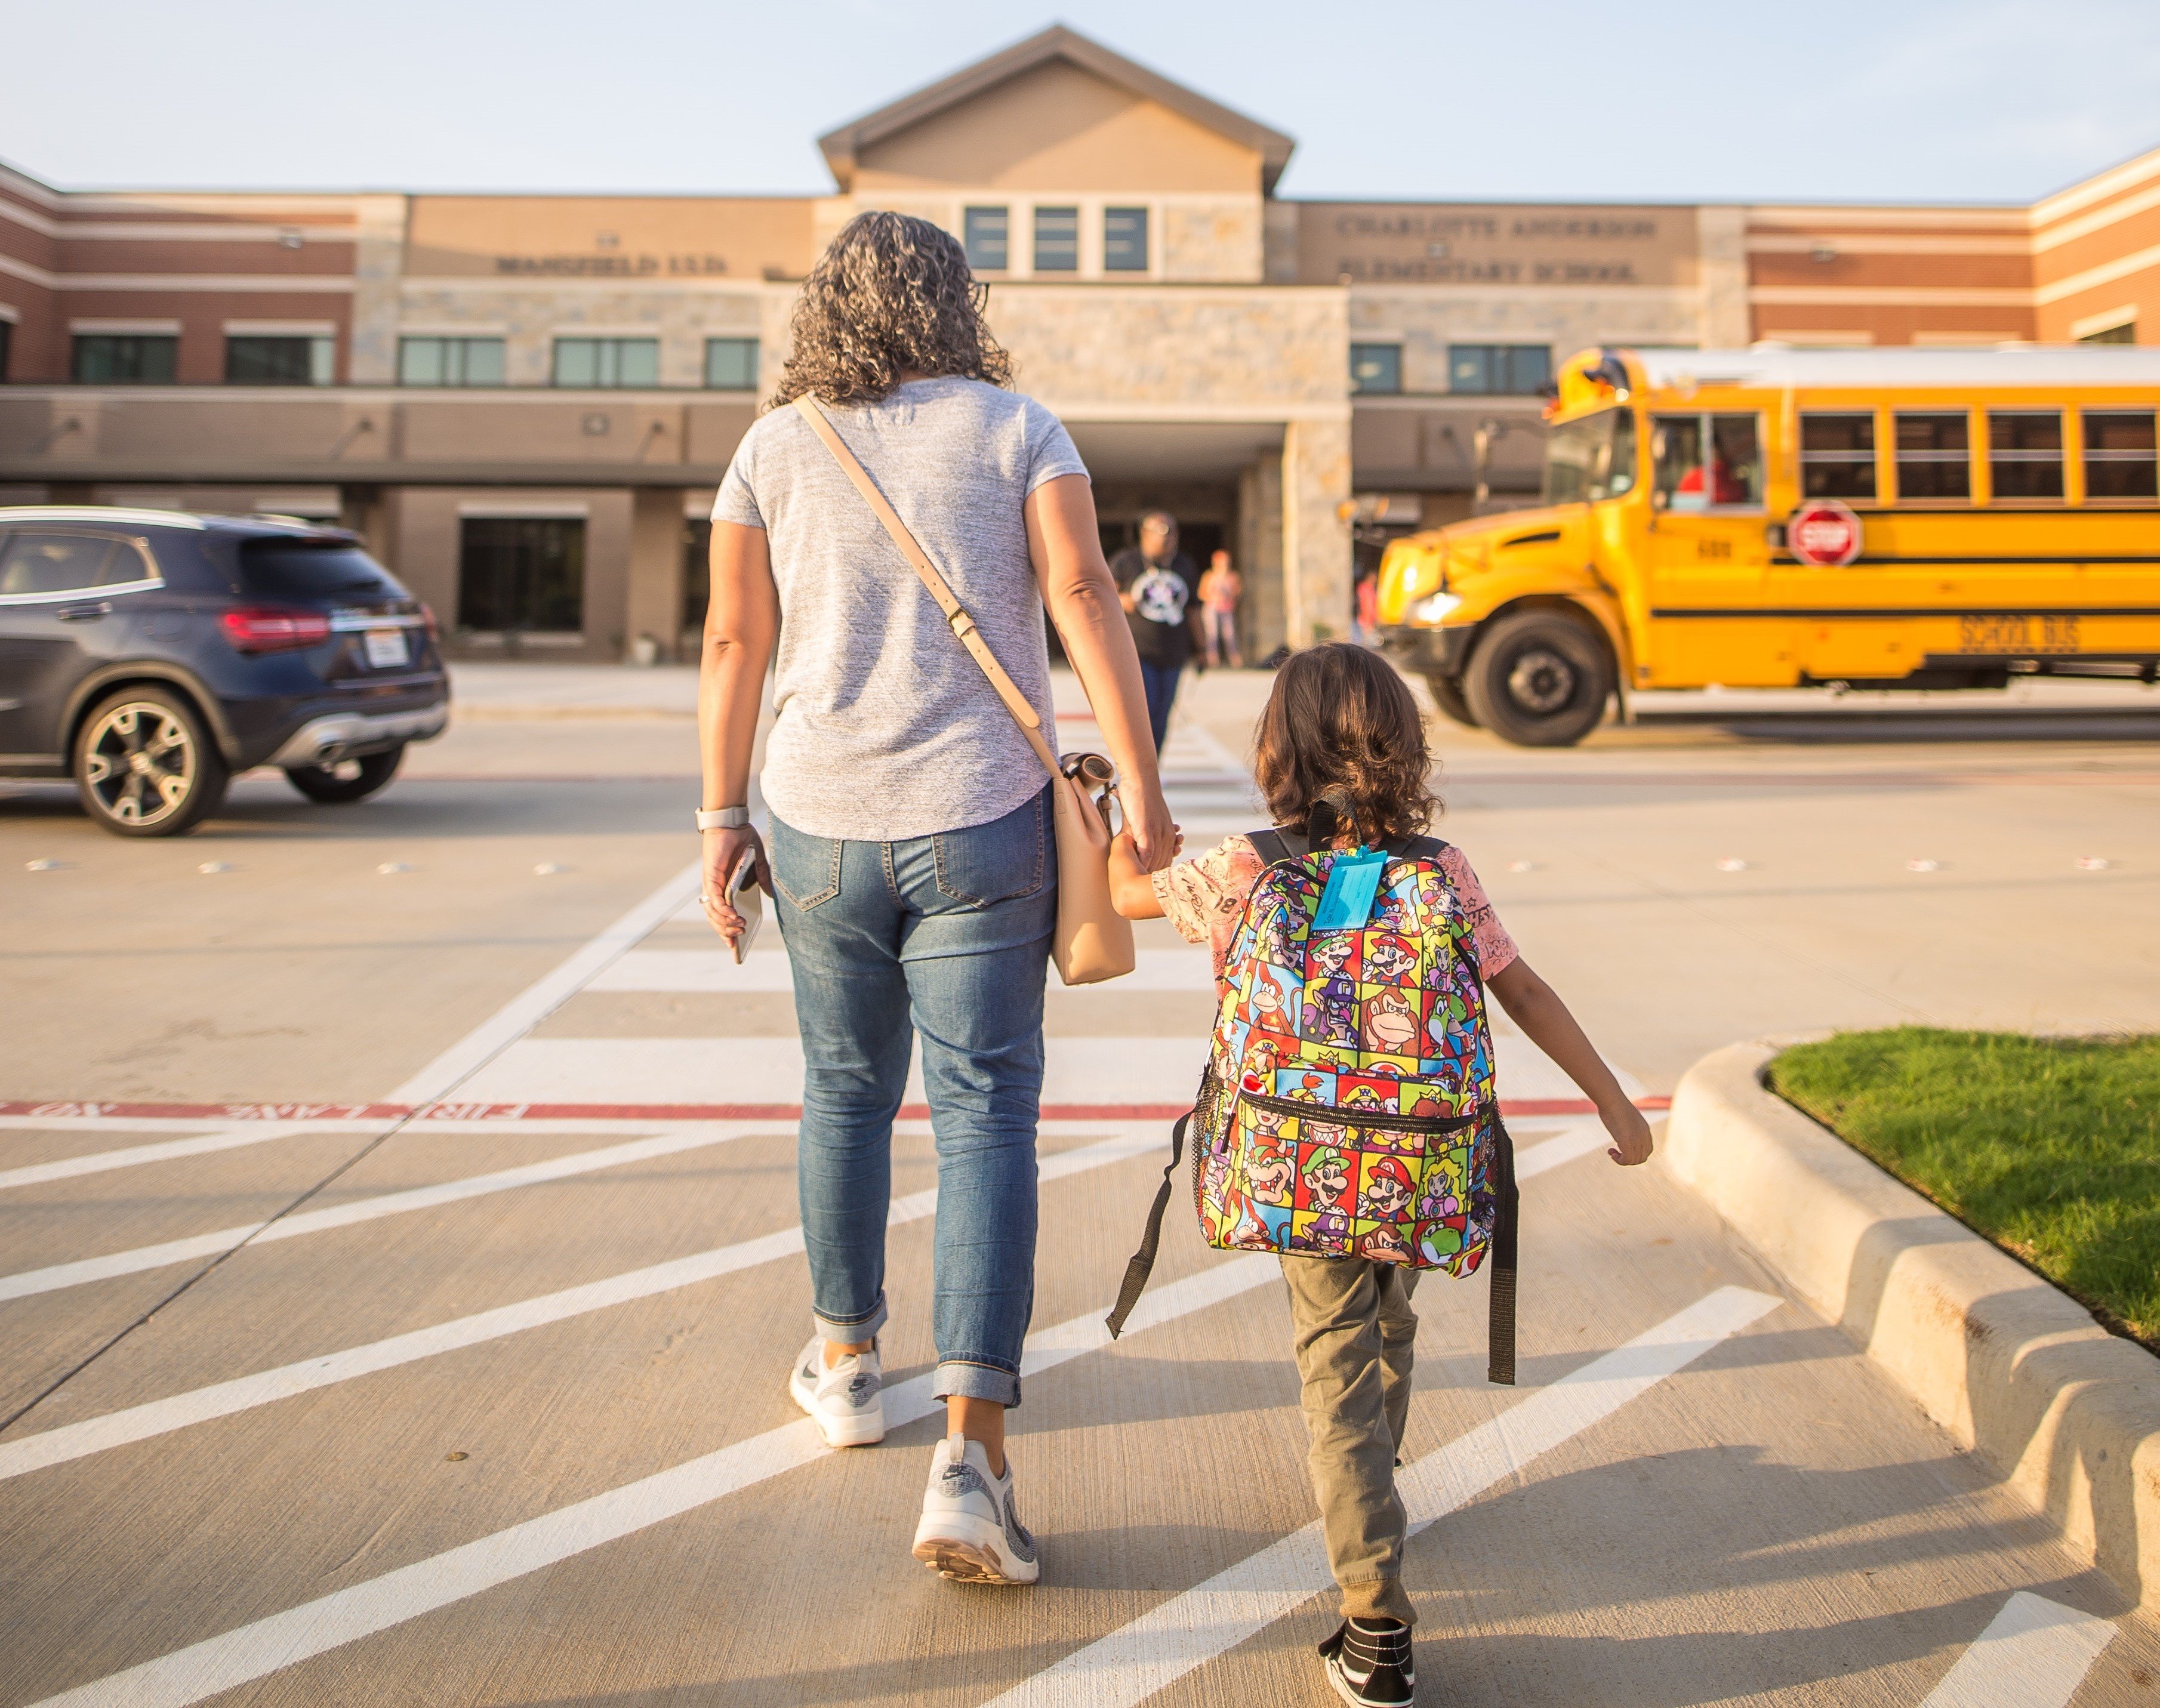 Parents online discussed about school bus safety after reading about OP's story. | Source: Pexels 